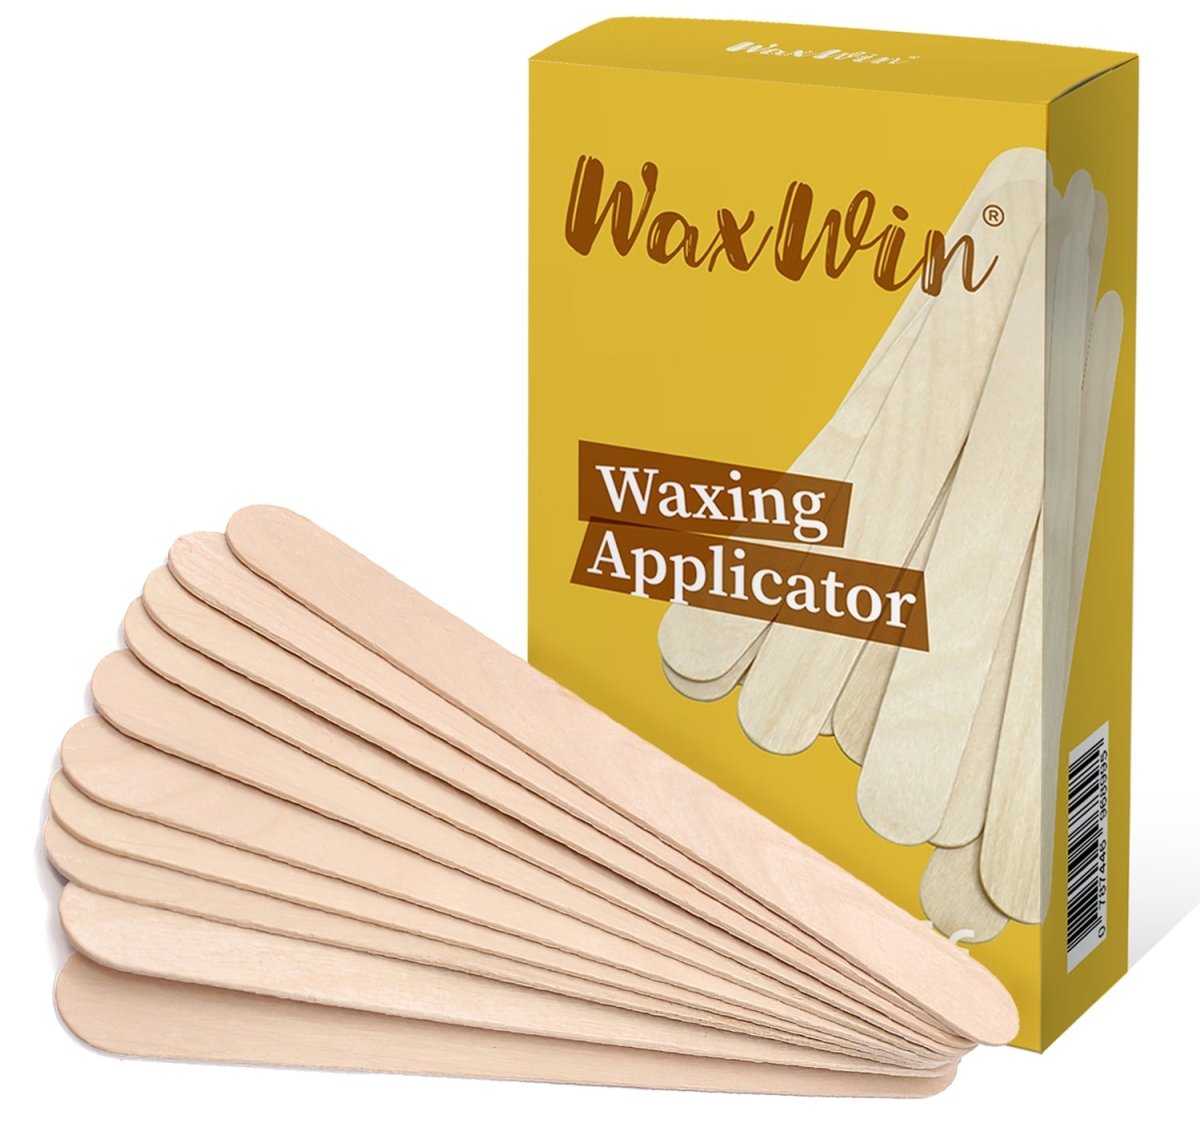 Dropship Dukal Wax Applicator Sticks 6. Case Of 5000 Wooden Waxing  Spatulas For Home Use Or Salon. Appropriate For All Wax Applications. Large  Size. Latex-free. Thin Design. to Sell Online at a